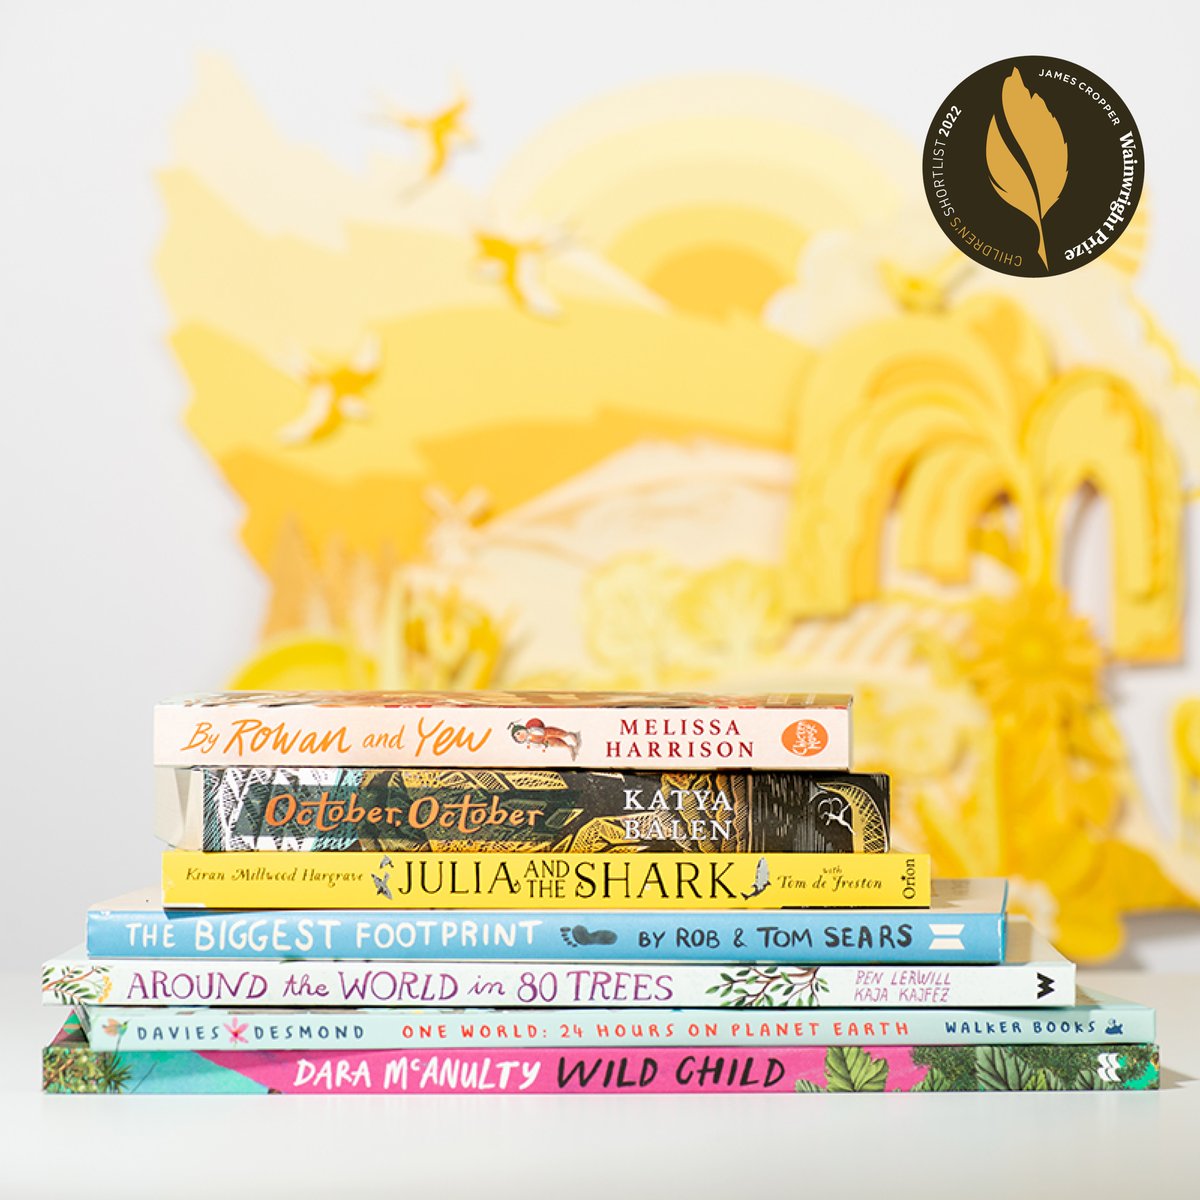 1/2 The #WainwrightPrize22 shortlist for writing on #Nature & #Conservation for Children is… ⭐️🧡 Around the World in 80 Trees, @benlerwill By Rowan and Yew, @M_Z_Harrison Julia and the Shark, @Kiran_MH October, October, @katyabalen @ANGELACHARDING #JCWP22 @jamescropper